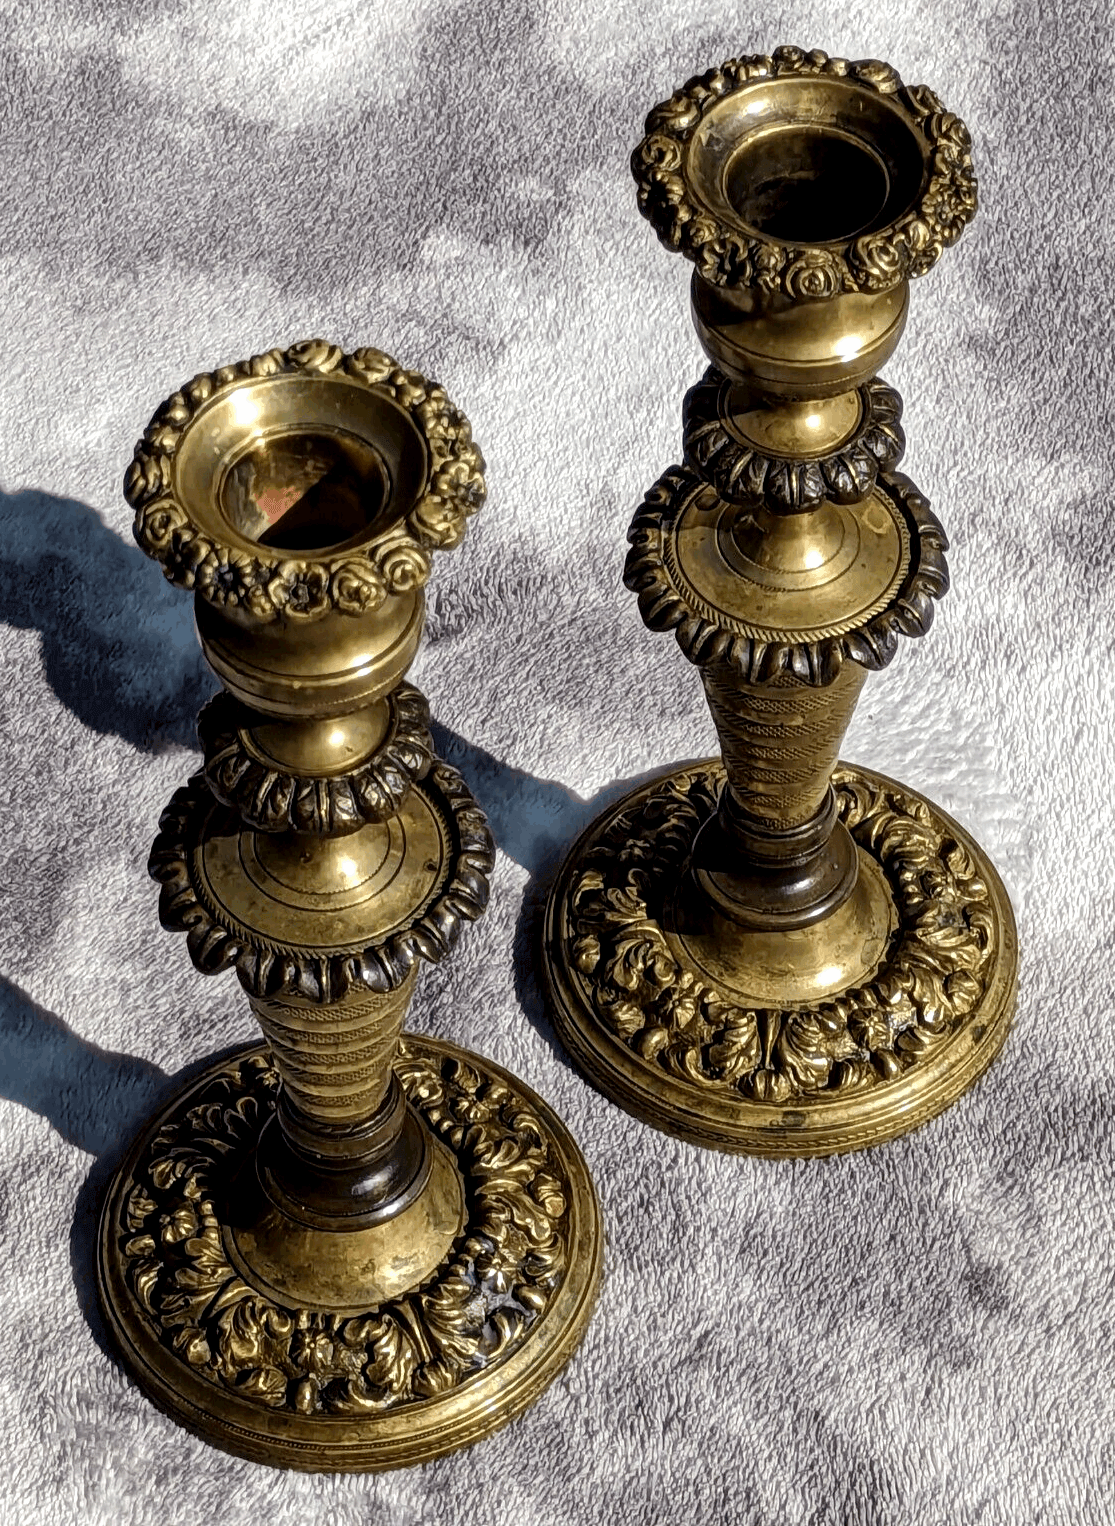 19th Century Antique Pair of Ornate Brass & Bronze Beehive Candlestick Holders